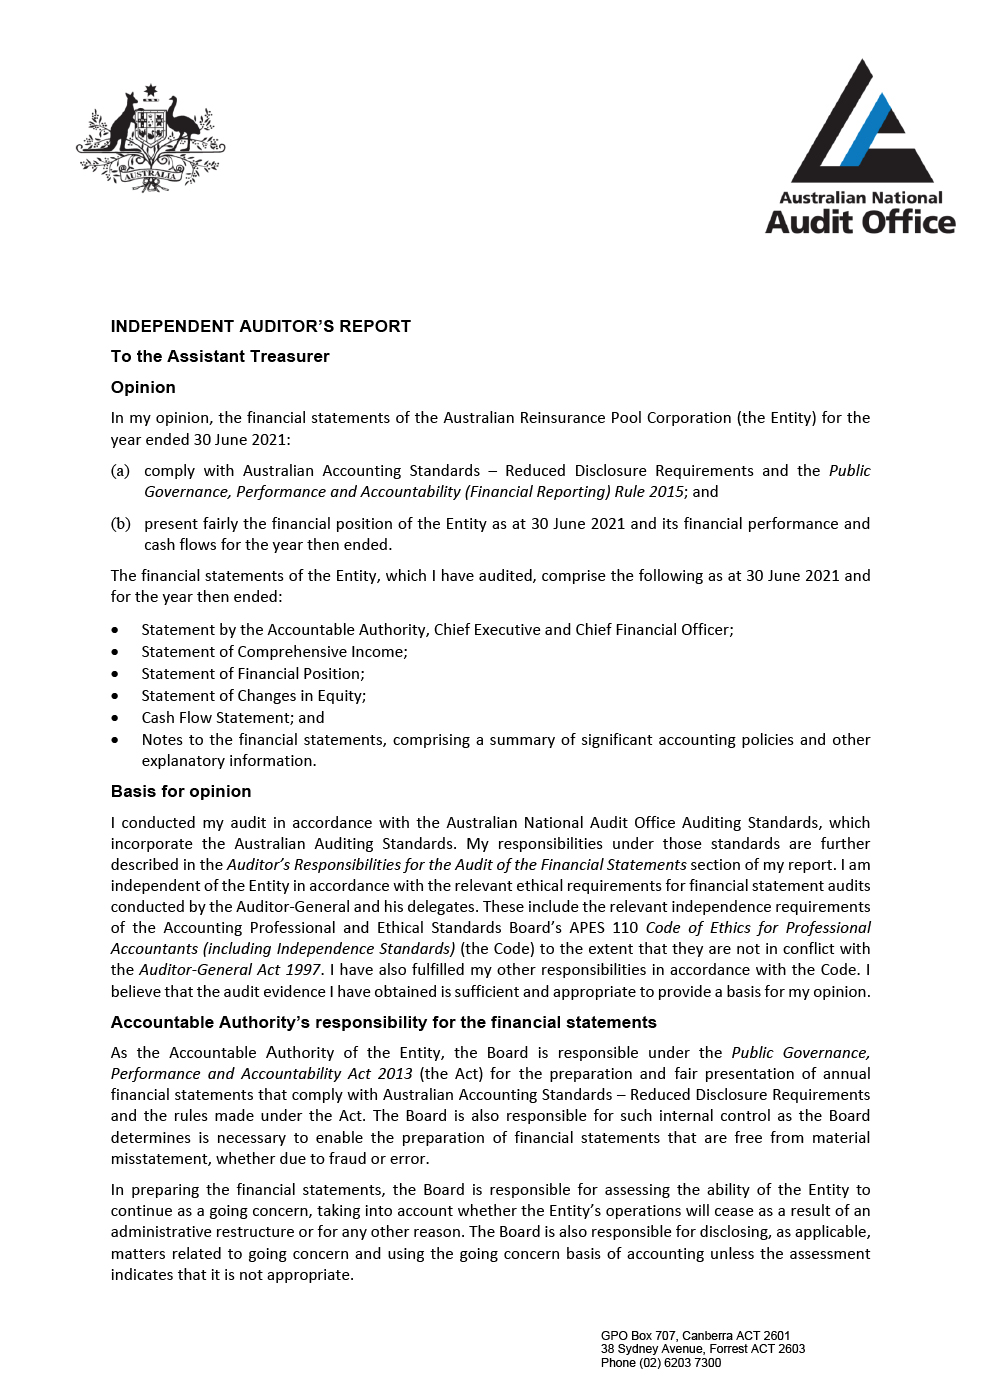 Image: Independent auditor's report, page 1